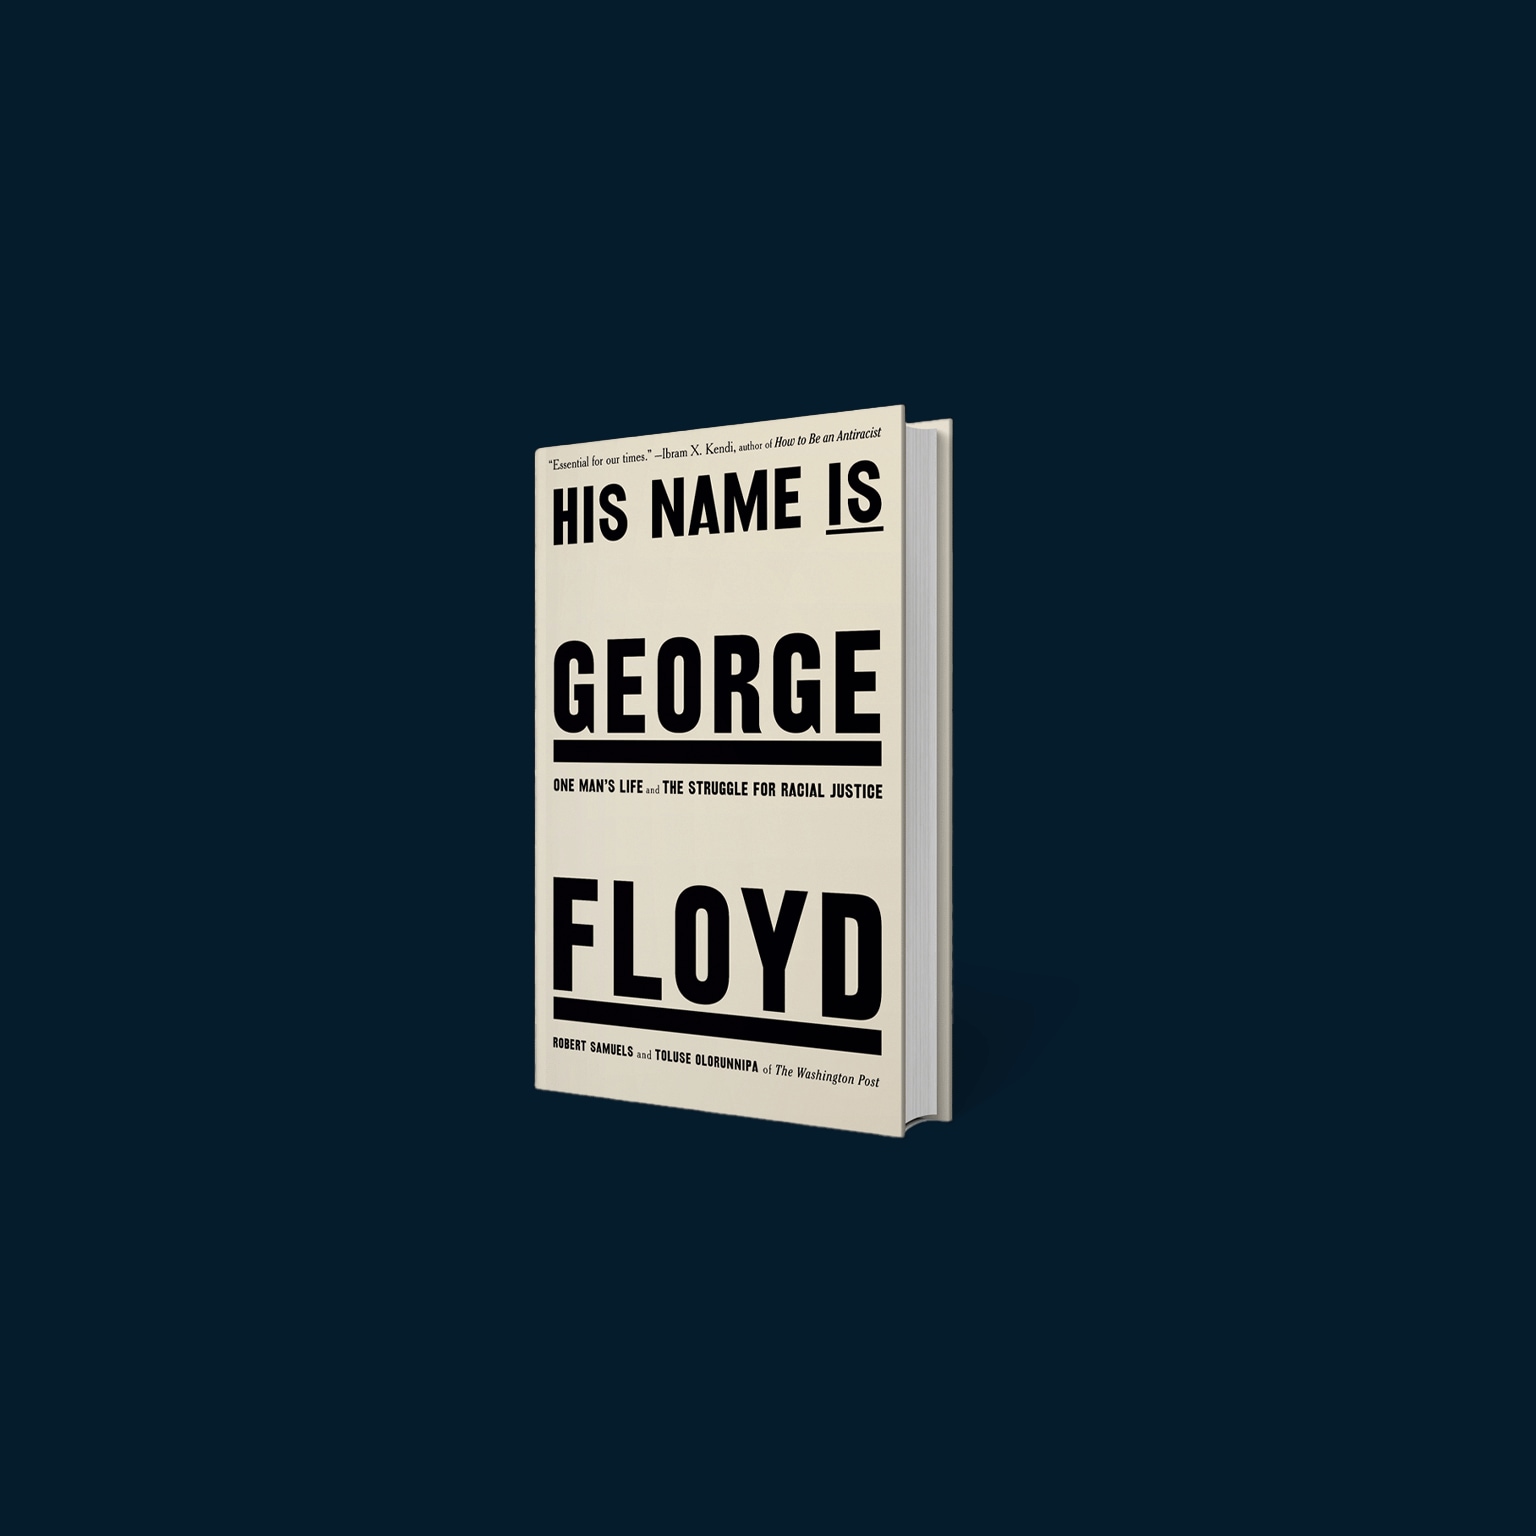 Image of the book entitled His Name is George Floyd